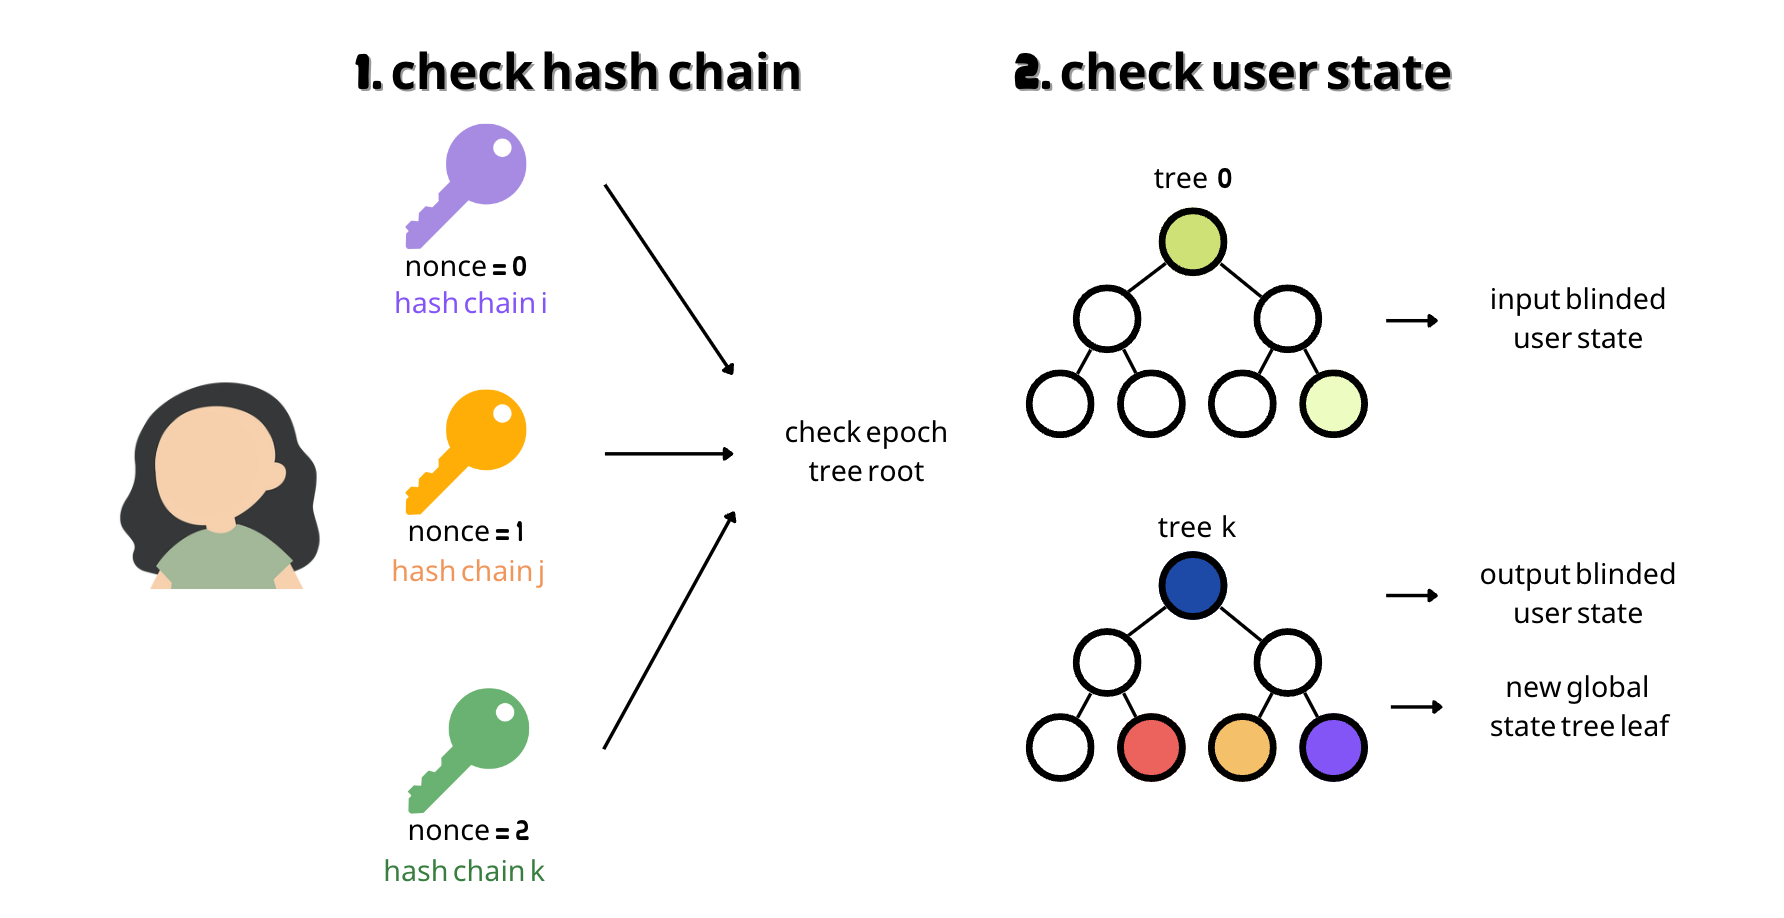 How the final user state transition proof verifies hash chains and user states.